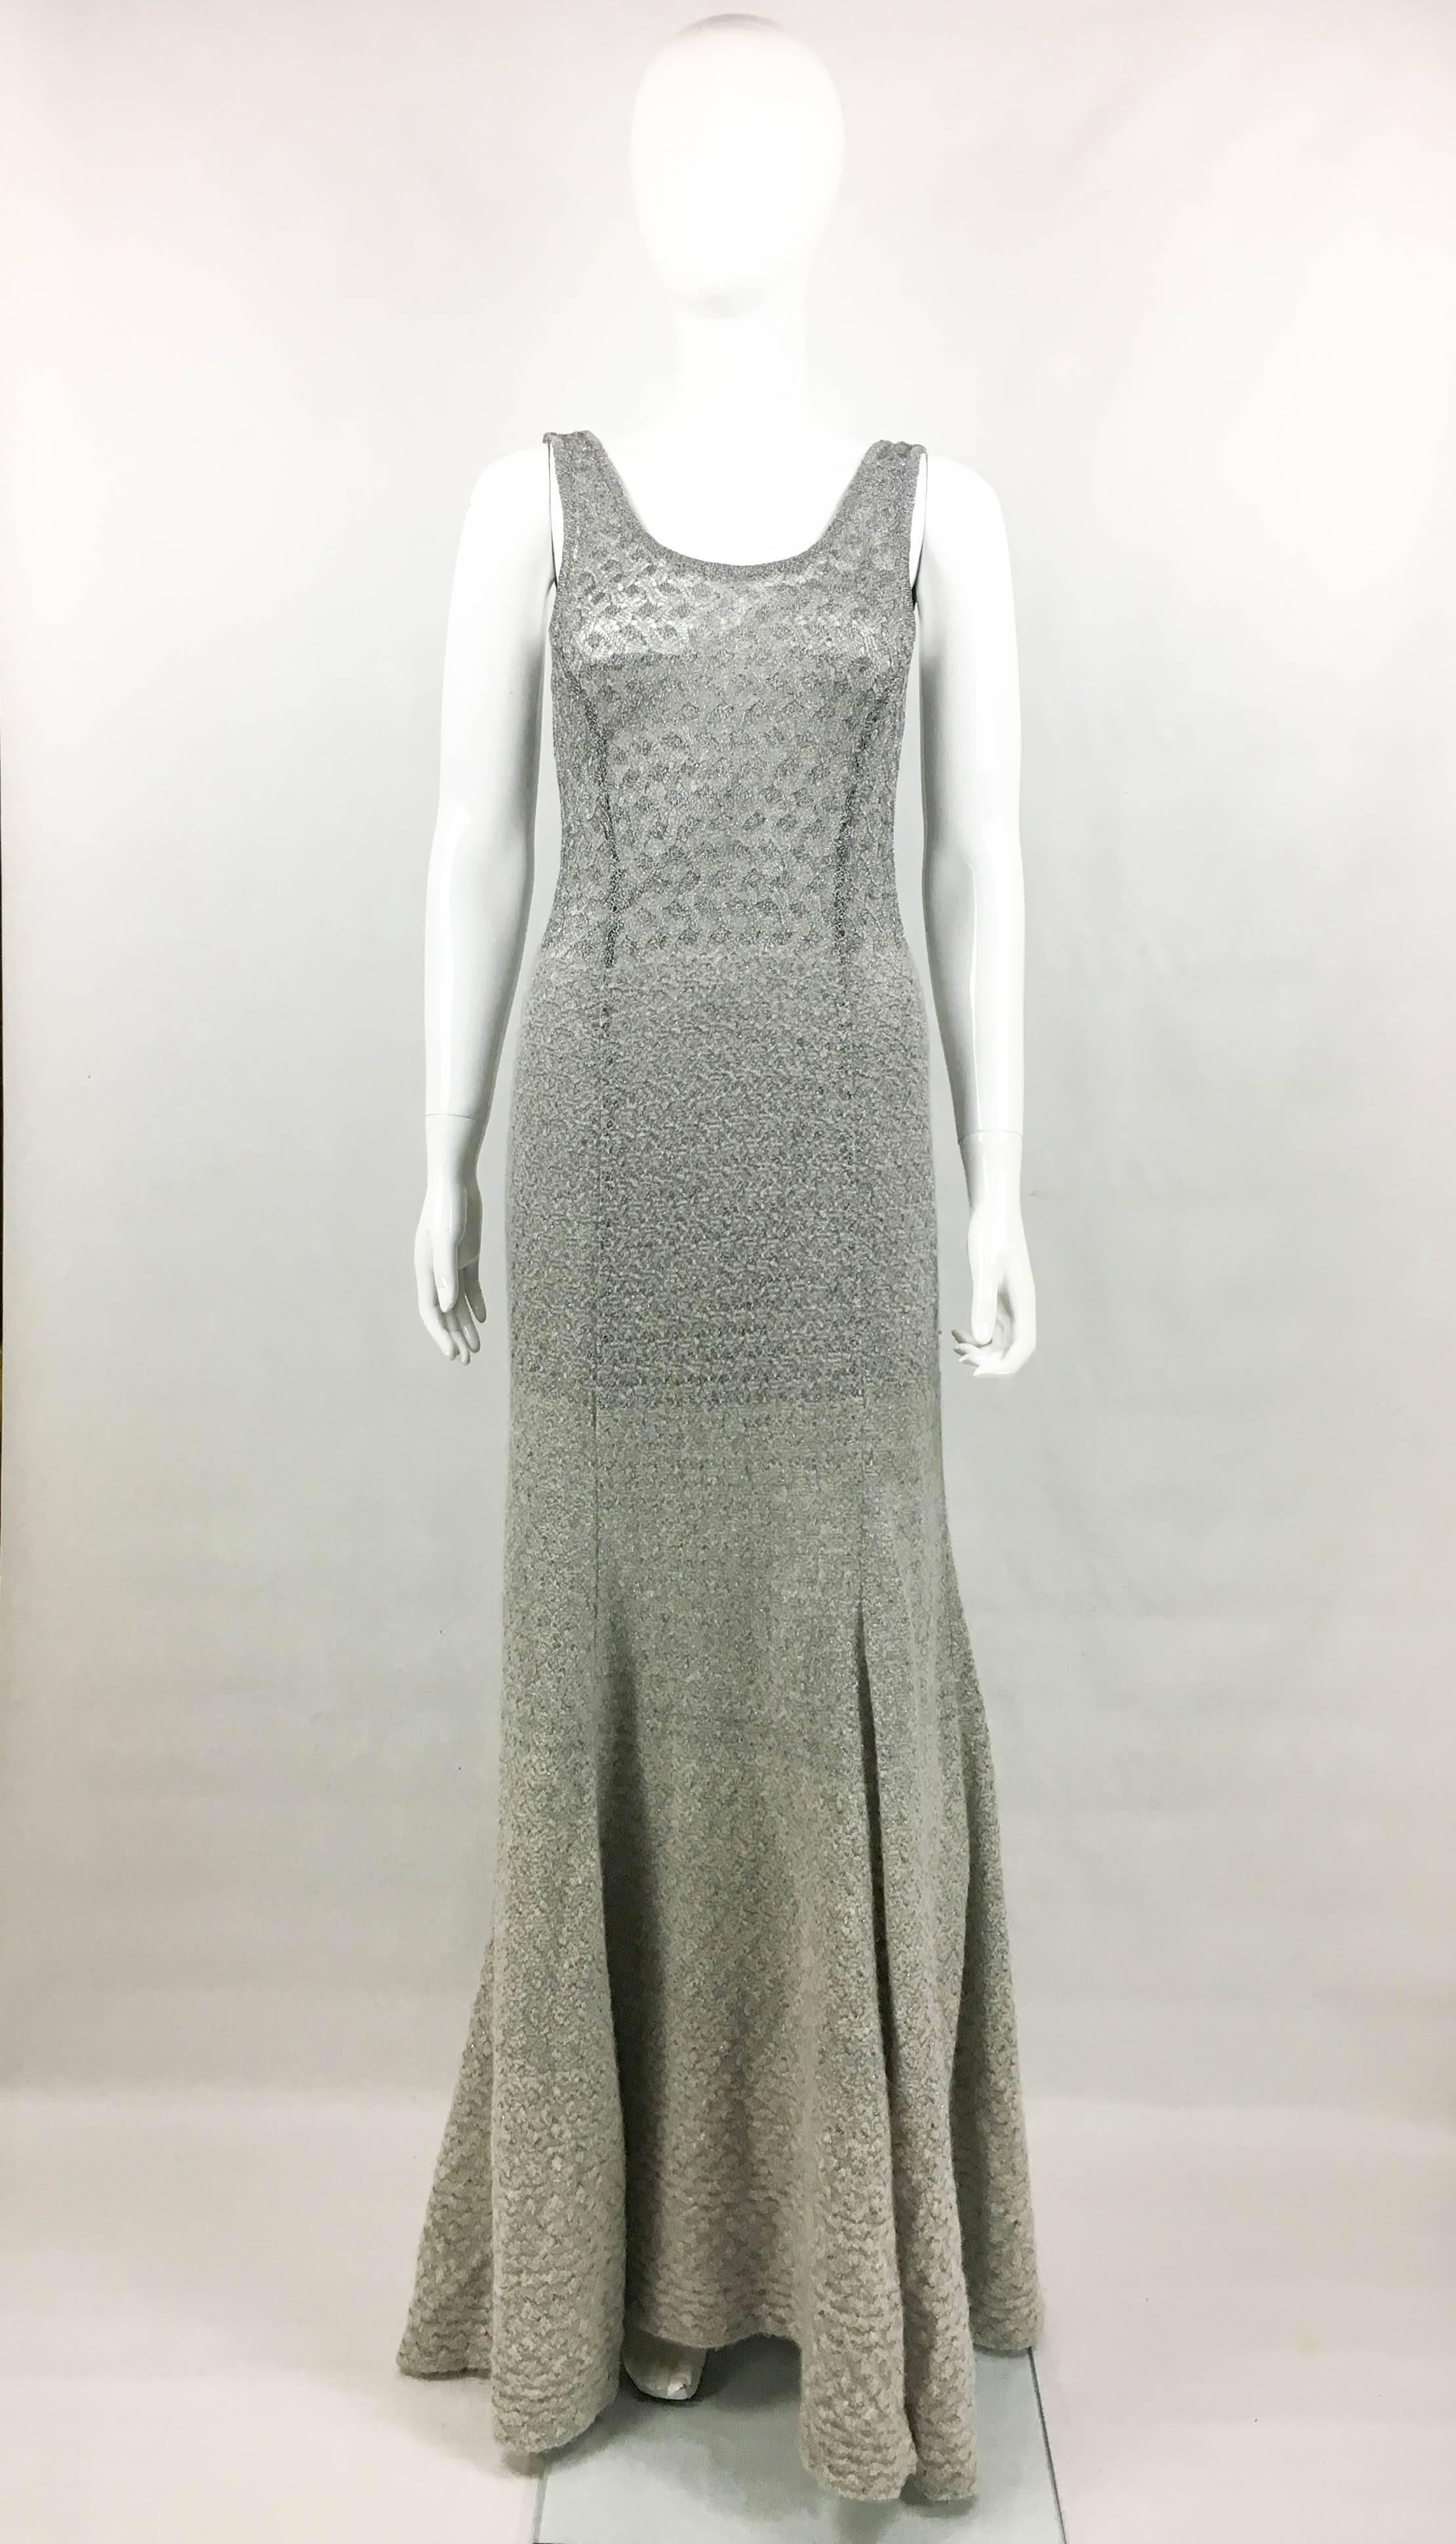 Missoni Grey Cashmere and Lurex Long Dress. This glamorous dress by Missoni is made in a very soft, light grey cashmere and silver lurex. The design of the dress brings a light top and a heavier, more dramatic bottom part. The straps are only in